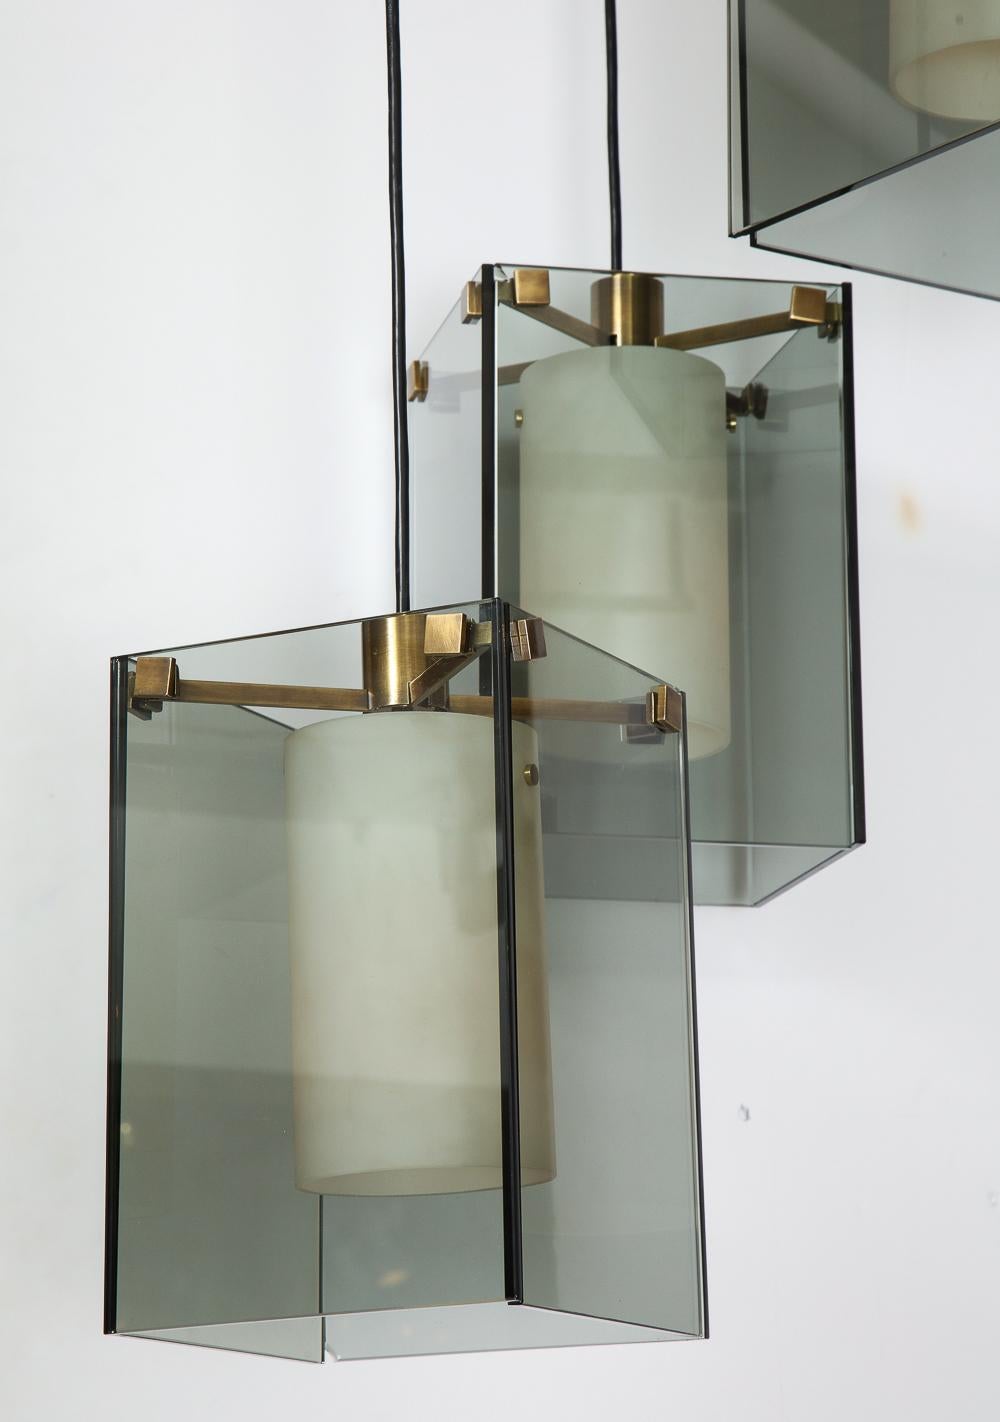 Model #2210, 3-light pendant. Smokey-gray glass panels with frosted-glass cylindrical shades. Each shade conceals one standard size Edison socket. Oxidized brass mounts & ceiling plate. Drop height of each pendant can be adjusted. *small chip to one